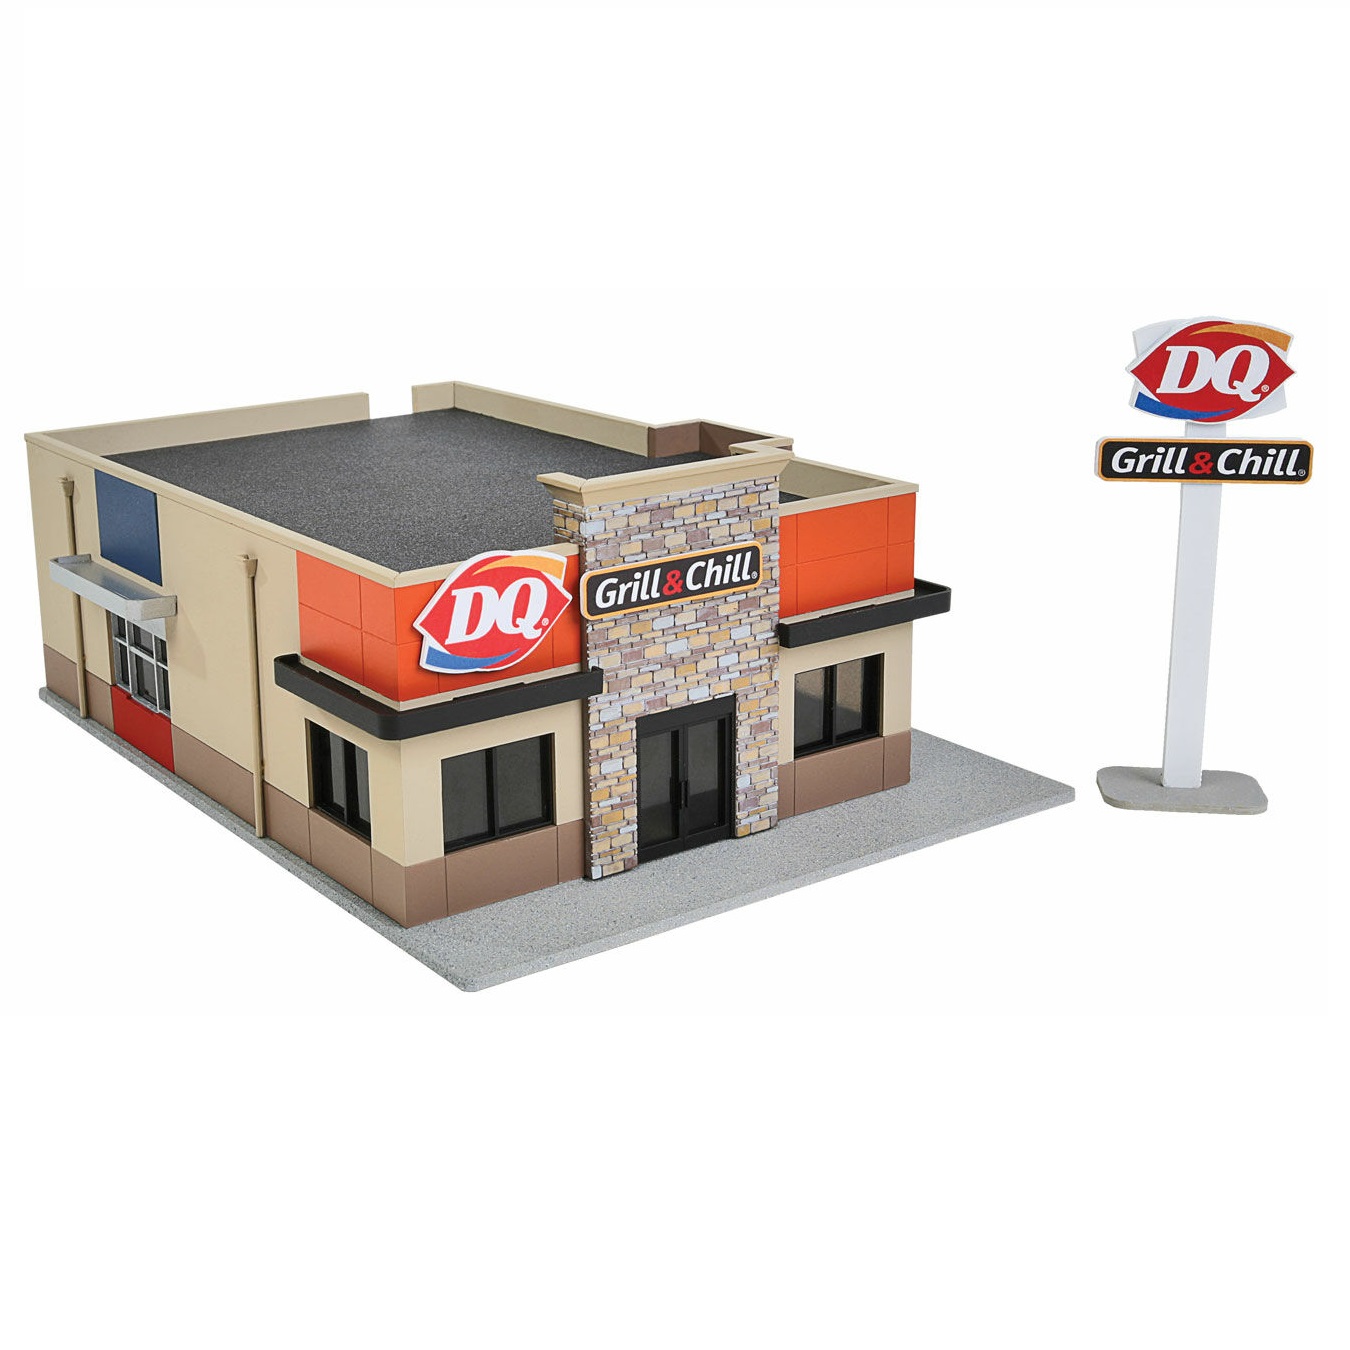 DQ® Grill & Chill